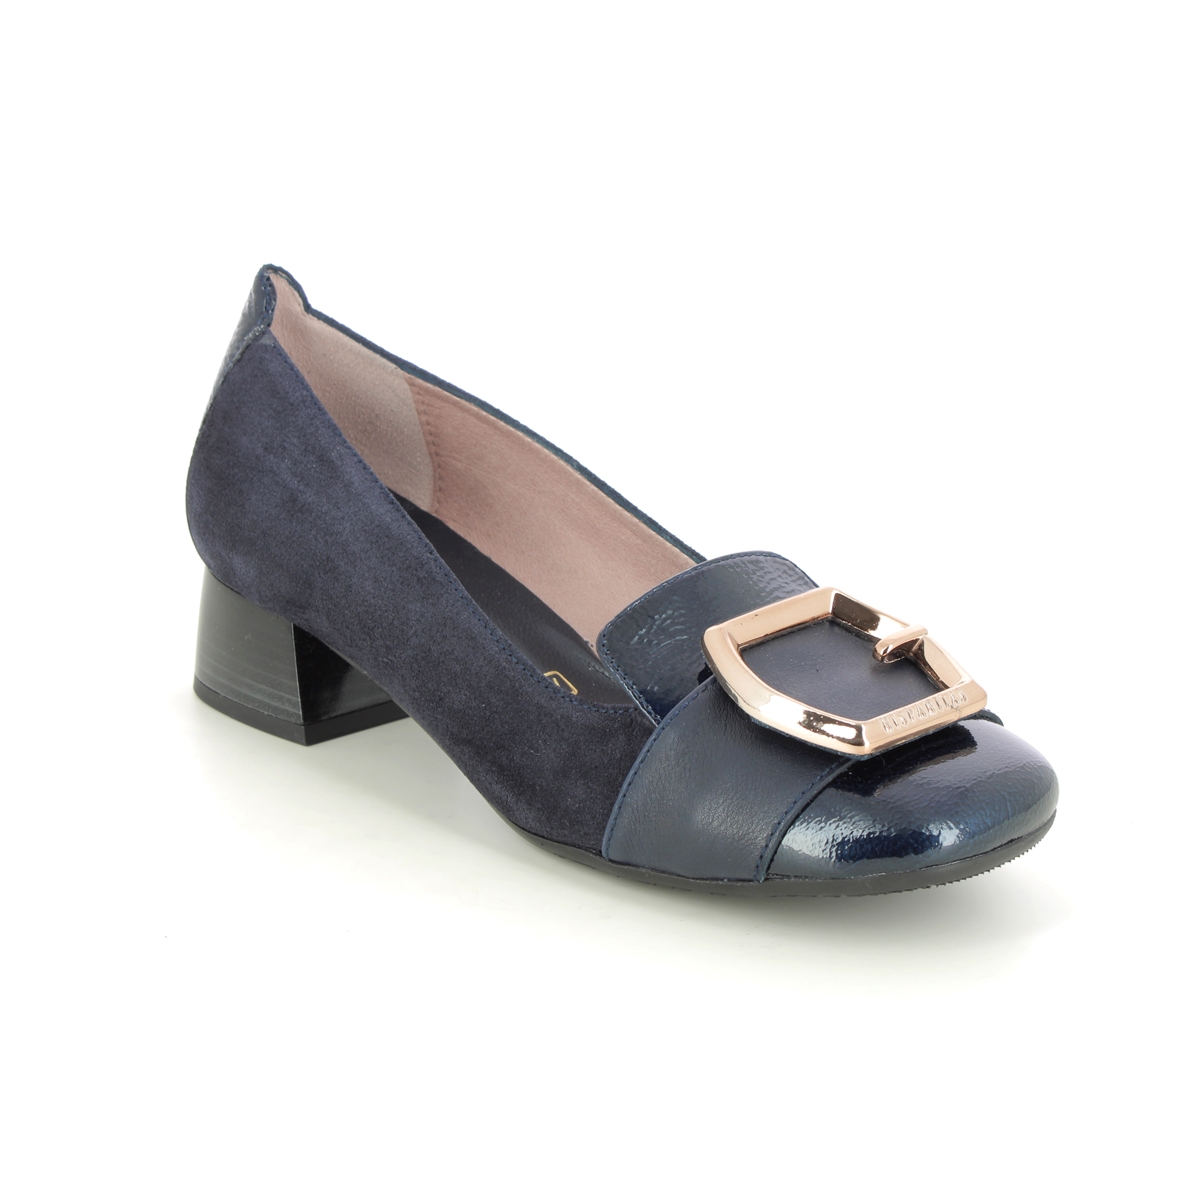 Hispanitas Manila 35mm Navy suede Womens pumps HI232987-73 in a Plain Leather in Size 40